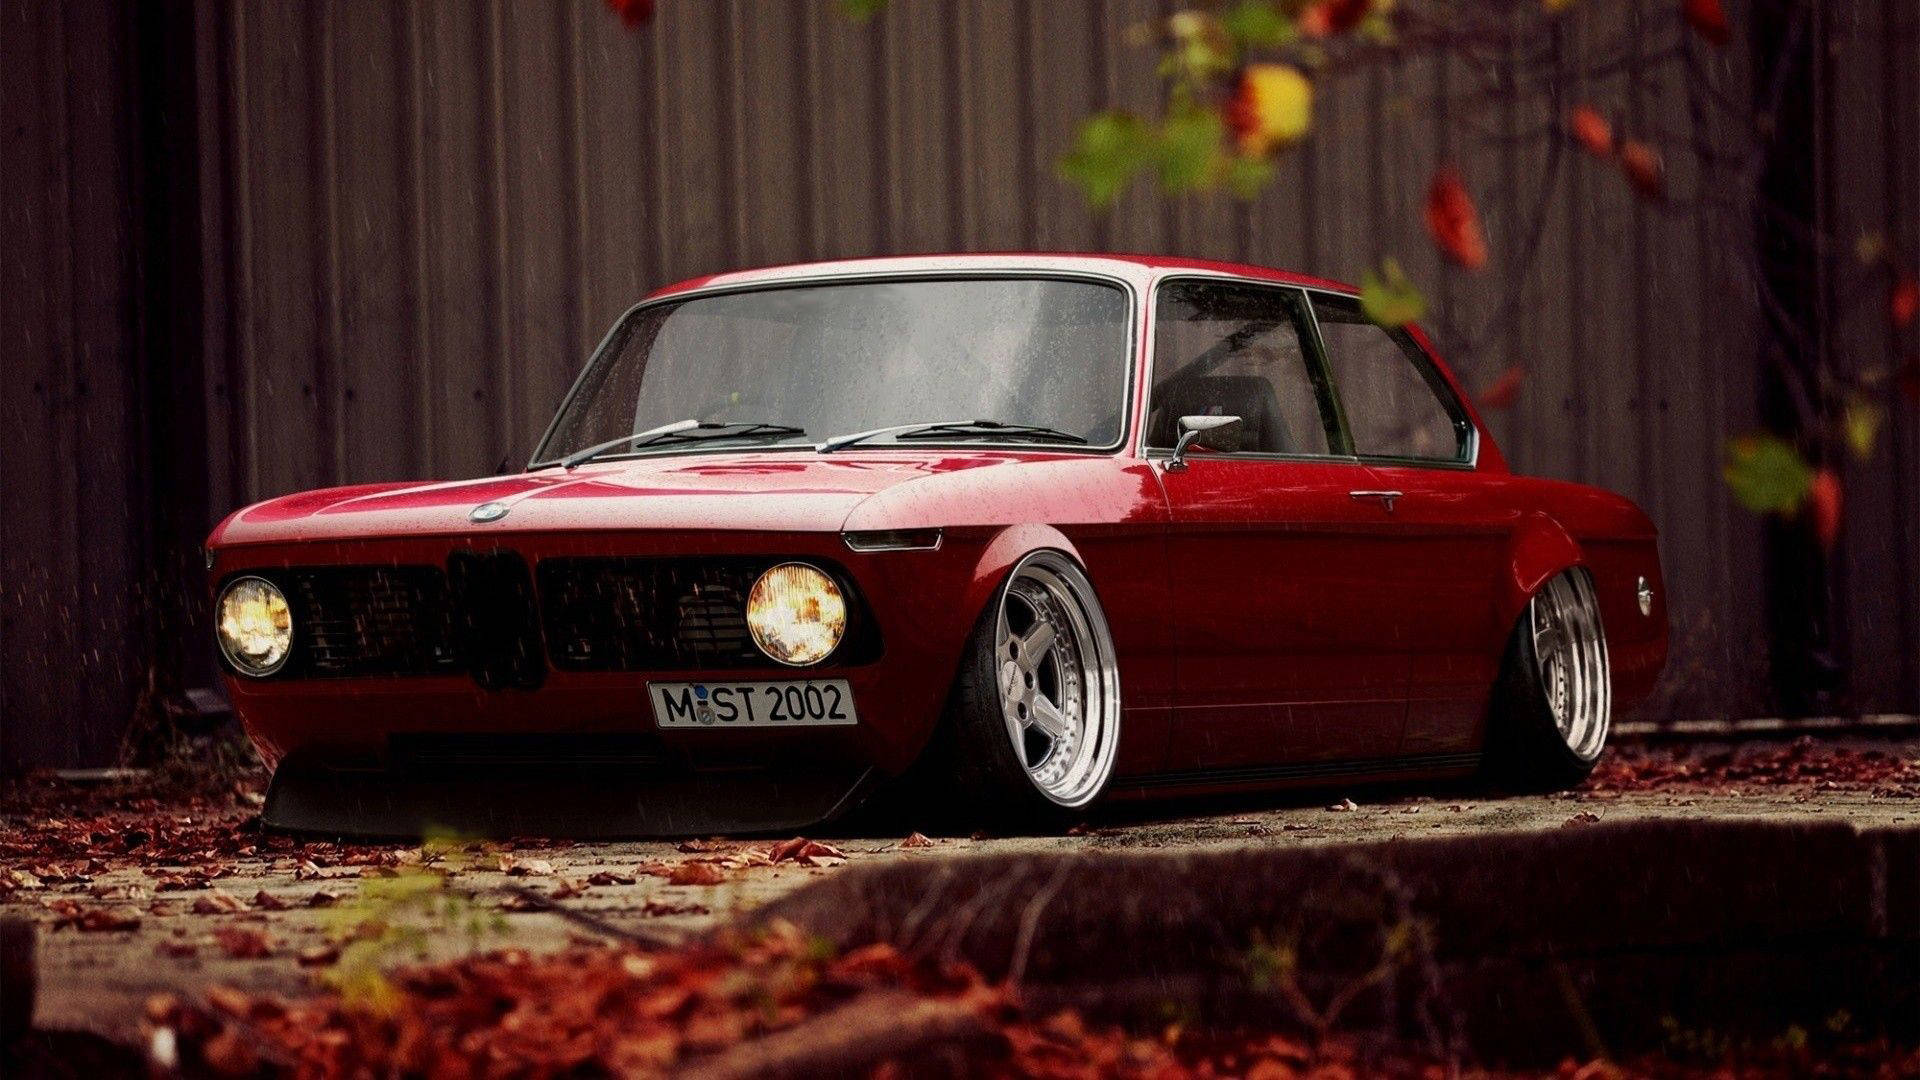 Red Slammed Classic Bmw Background